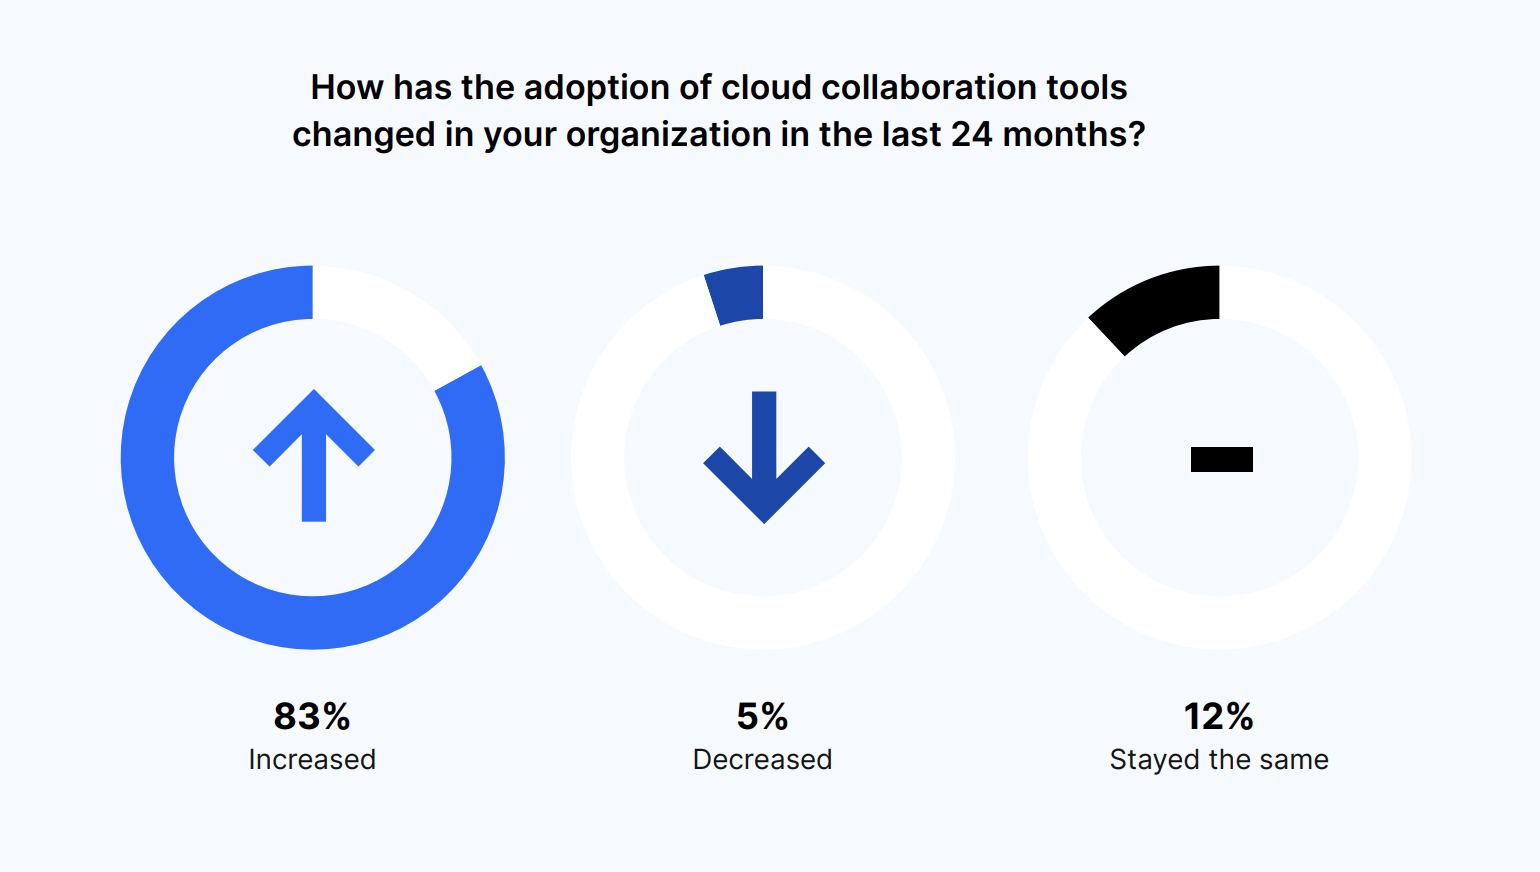 How has the adoption of cloud collaboration tools changed in your organization in the last 24 months?